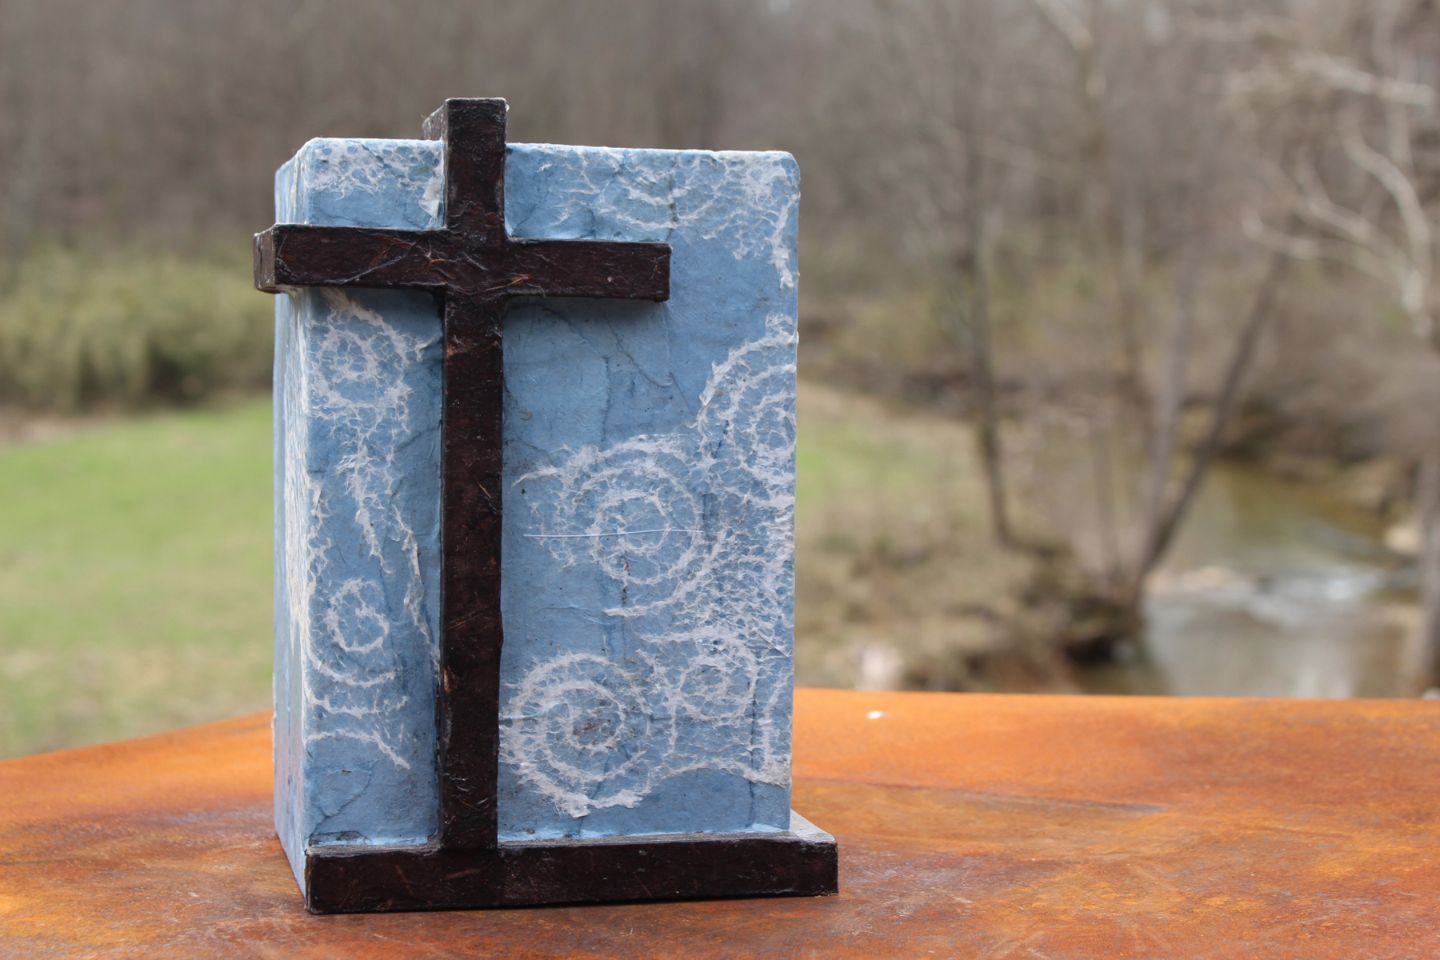 THE CROSS, a Full Size, Faith-based, One of a Kind Cremation Urn for Adult Human Ashes